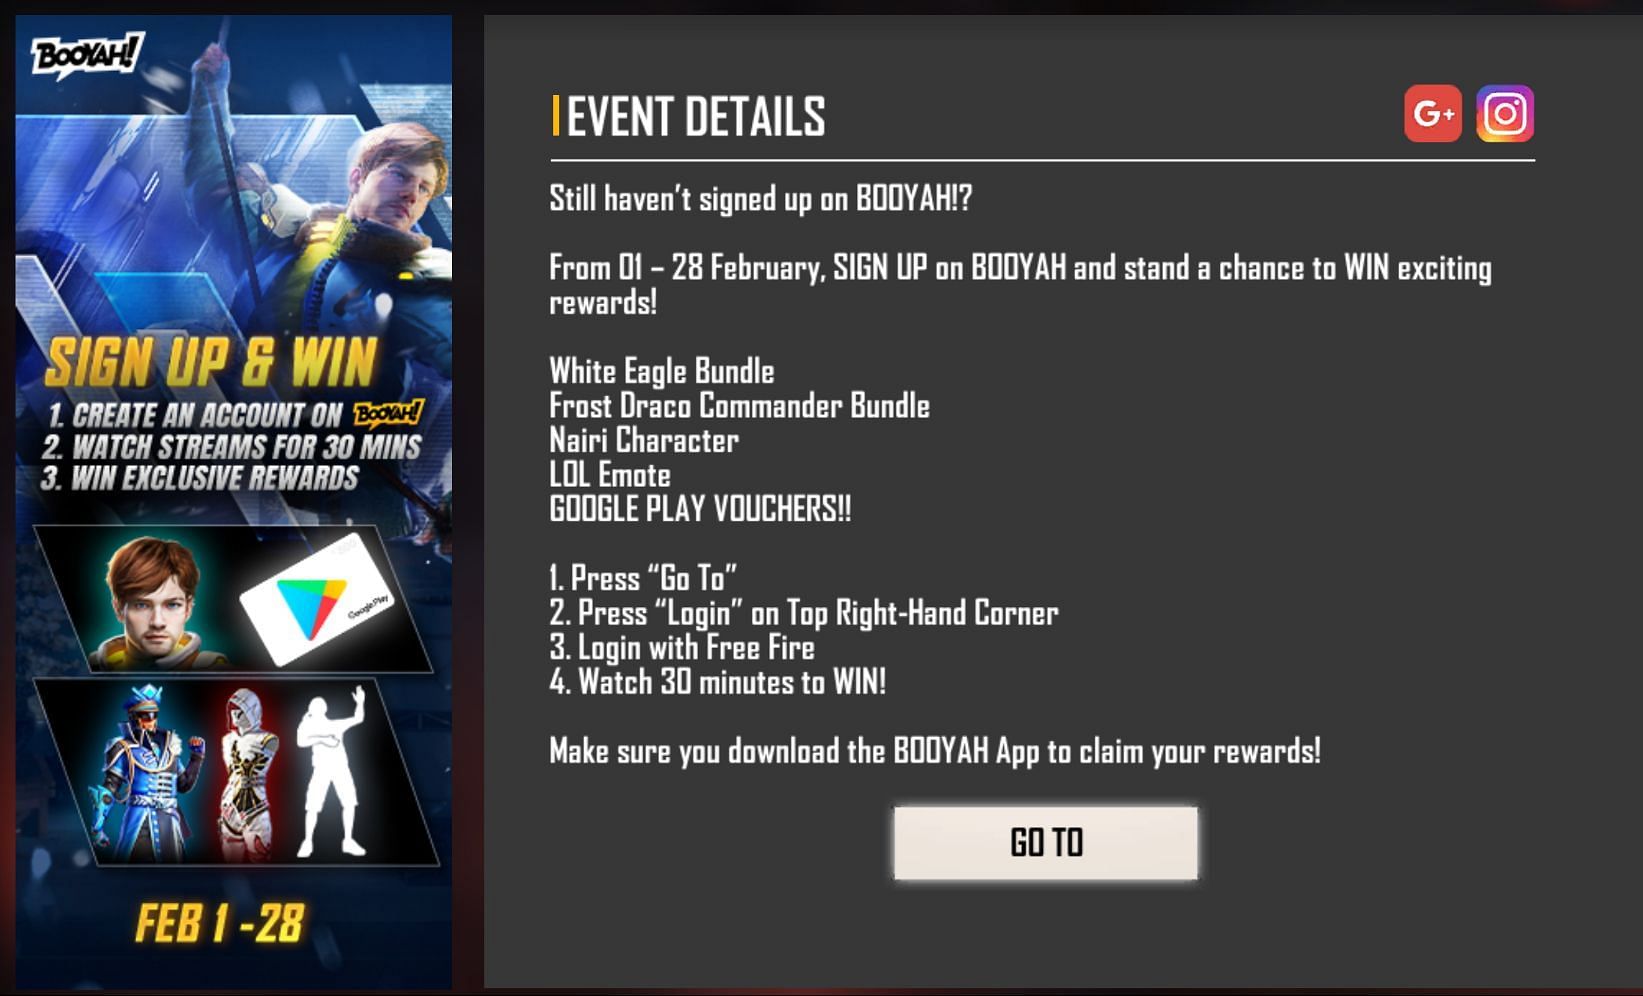 The event will be available until 28 February (Image via Garena)